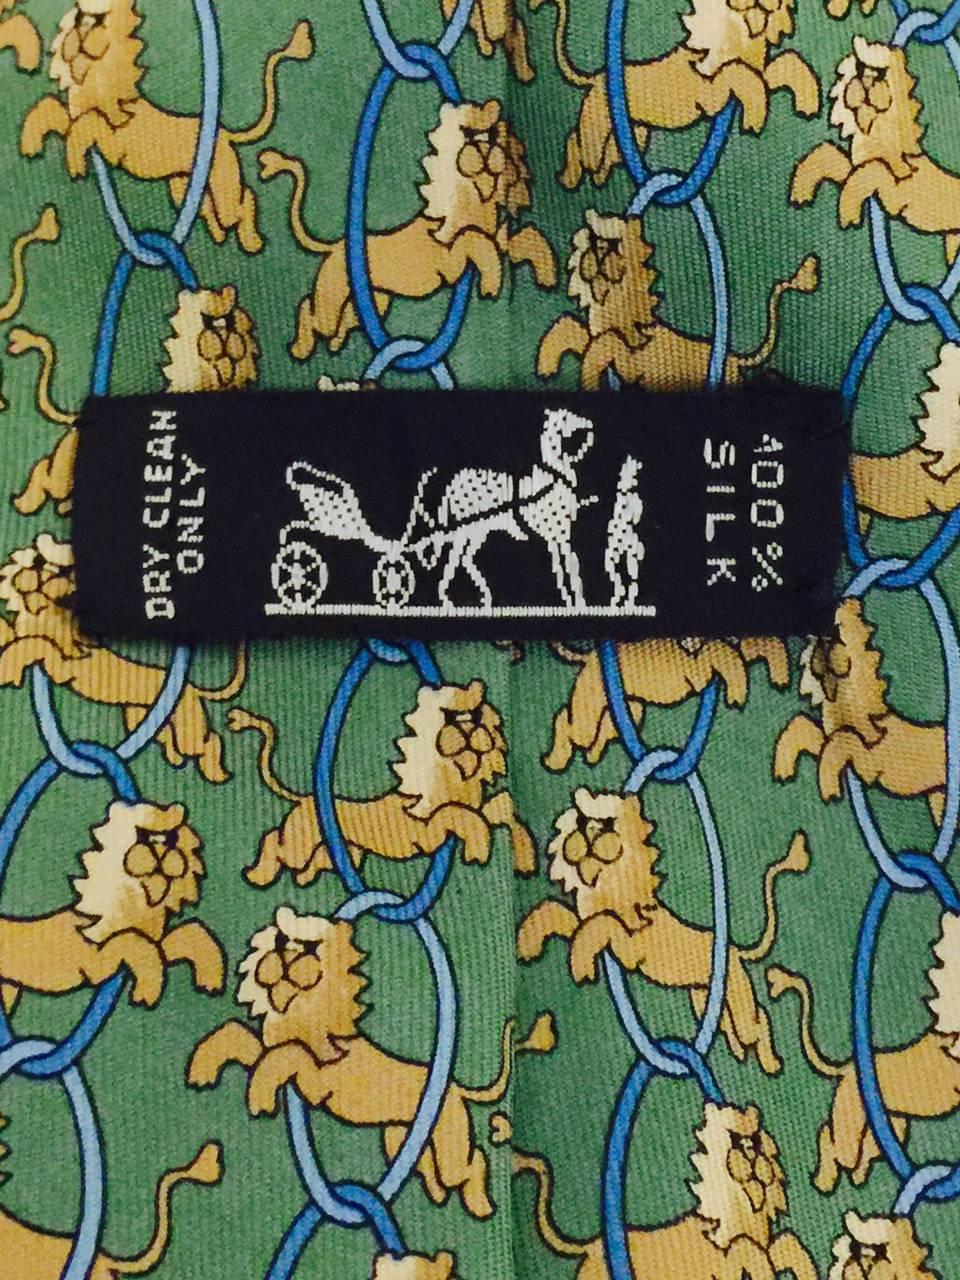 Men's Hermes vintage 1980's neck tie with whimsical lions jumping through chain hoops.  Sure to put a smile on your face during those difficult work days!